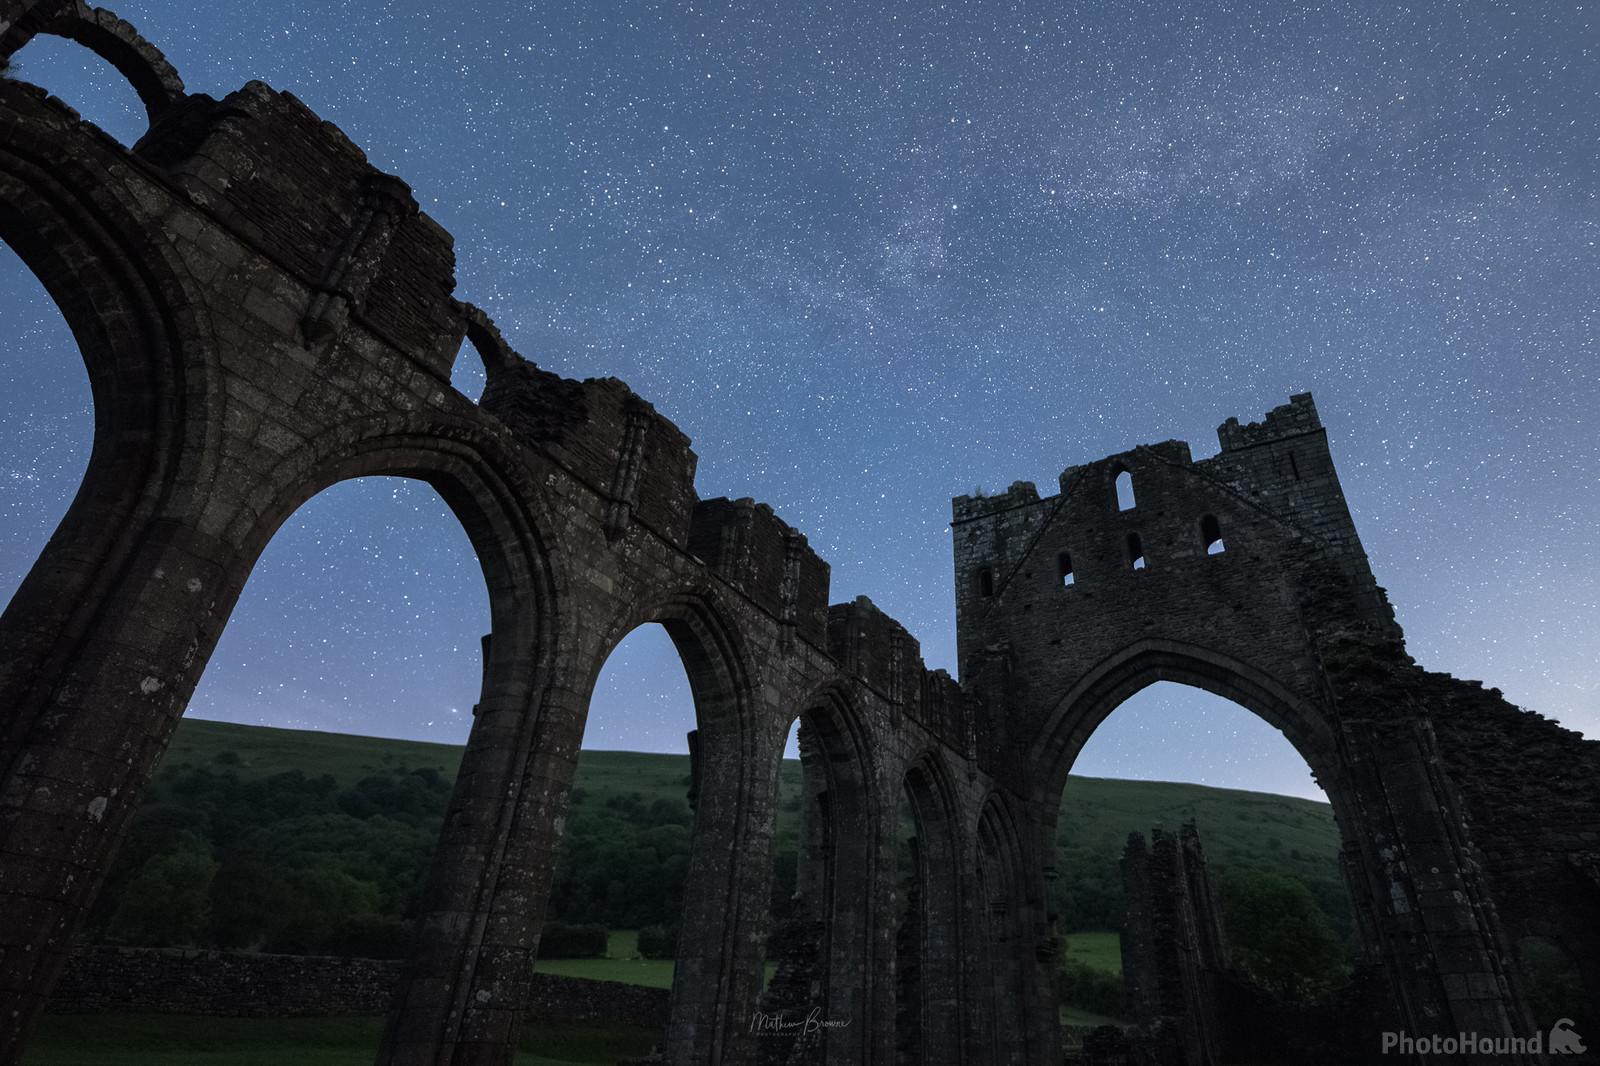 Image of Llanthony Priory by Mathew Browne